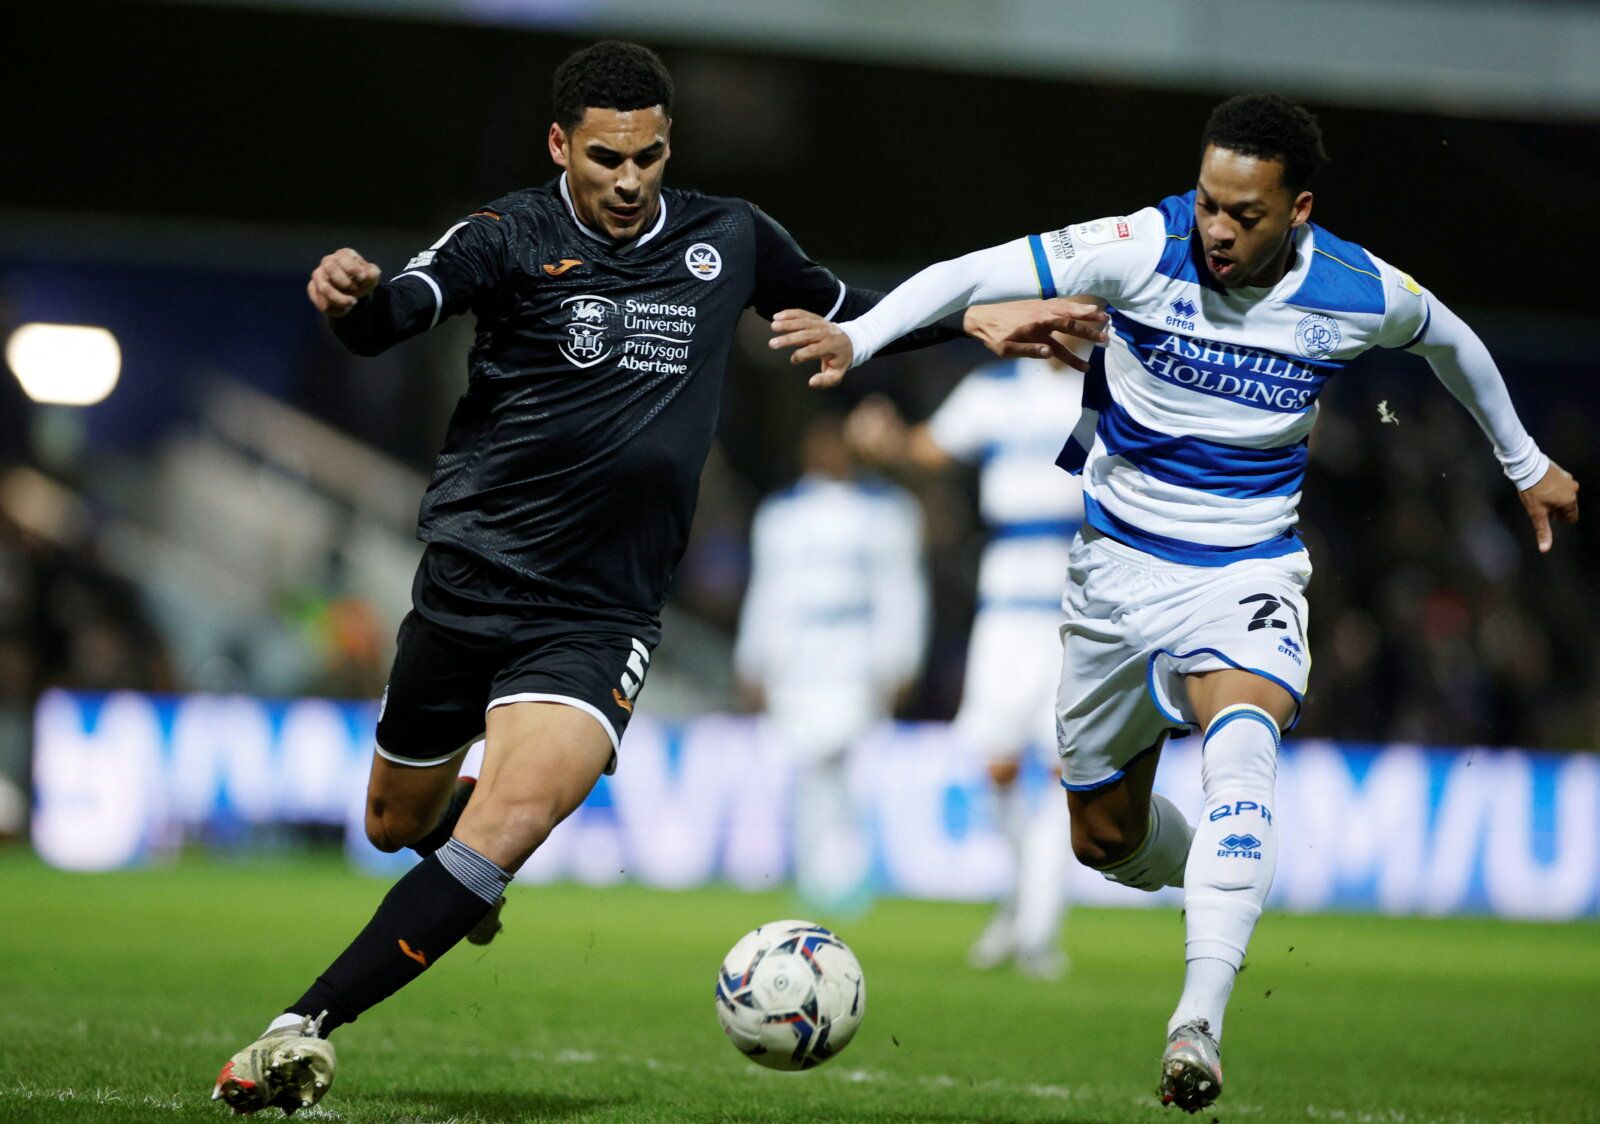 Soccer Football - Championship - Queens Park Rangers v Swansea City - Loftus Road, London, Britain - January 25, 2022 Swansea City's Ben Cabango in action with Queens Park Rangers' Chris Willock  Action Images/John Sibley  EDITORIAL USE ONLY. No use with unauthorized audio, video, data, fixture lists, club/league logos or "live" services. Online in-match use limited to 75 images, no video emulation. No use in betting, games or single club/league/player publications.  Please contact your account 